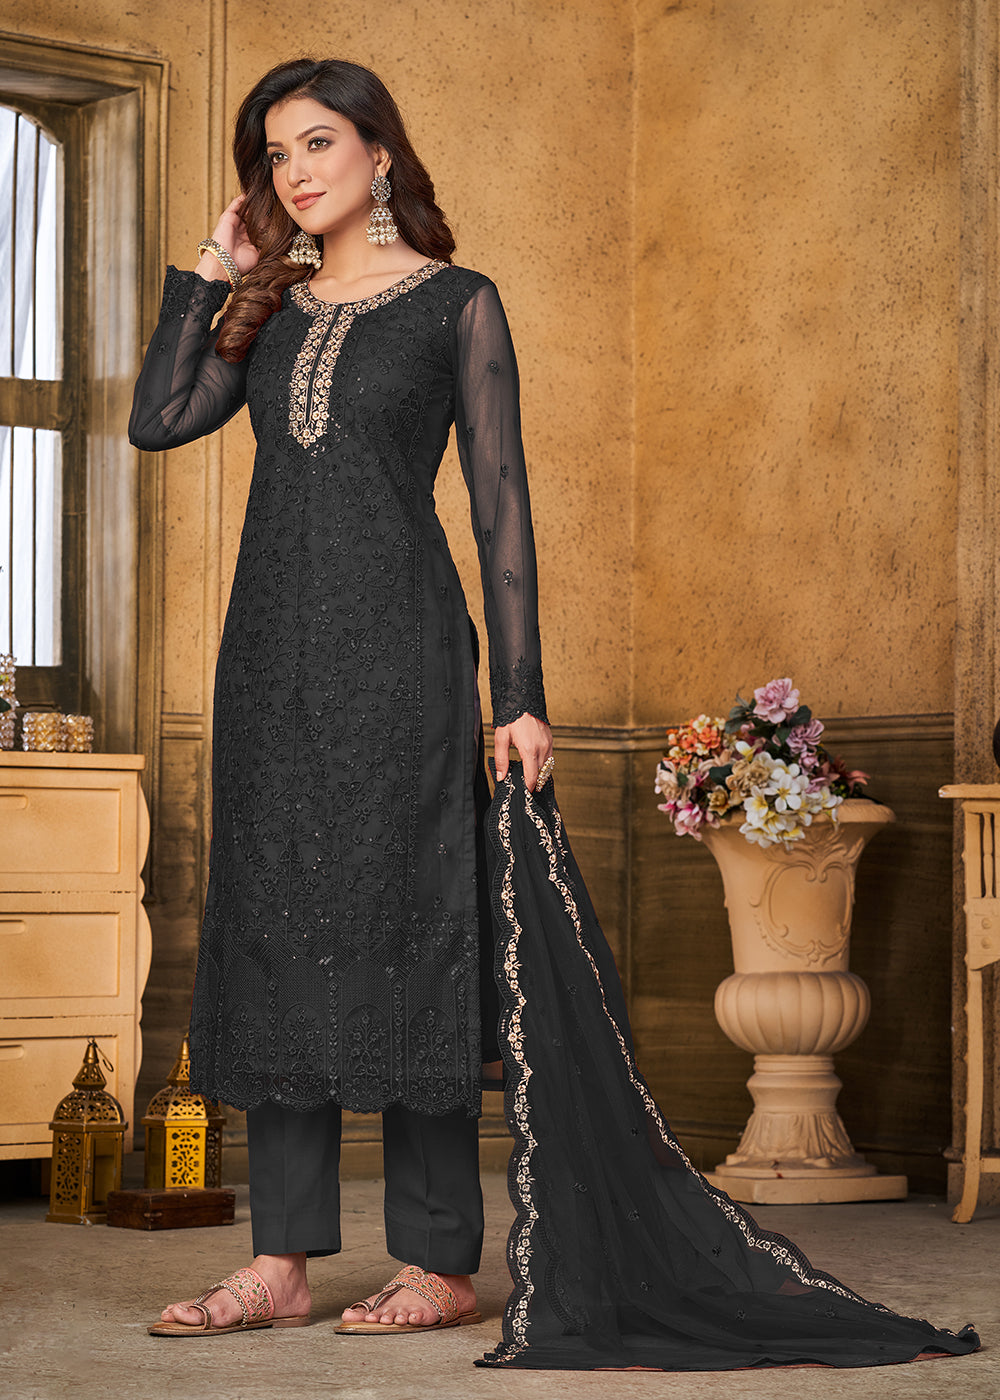 Buy Now Festive Party Black Net Embroidered Trendy Salwar Suit Online in USA, UK, Canada, Germany, Australia & Worldwide at Empress Clothing. 